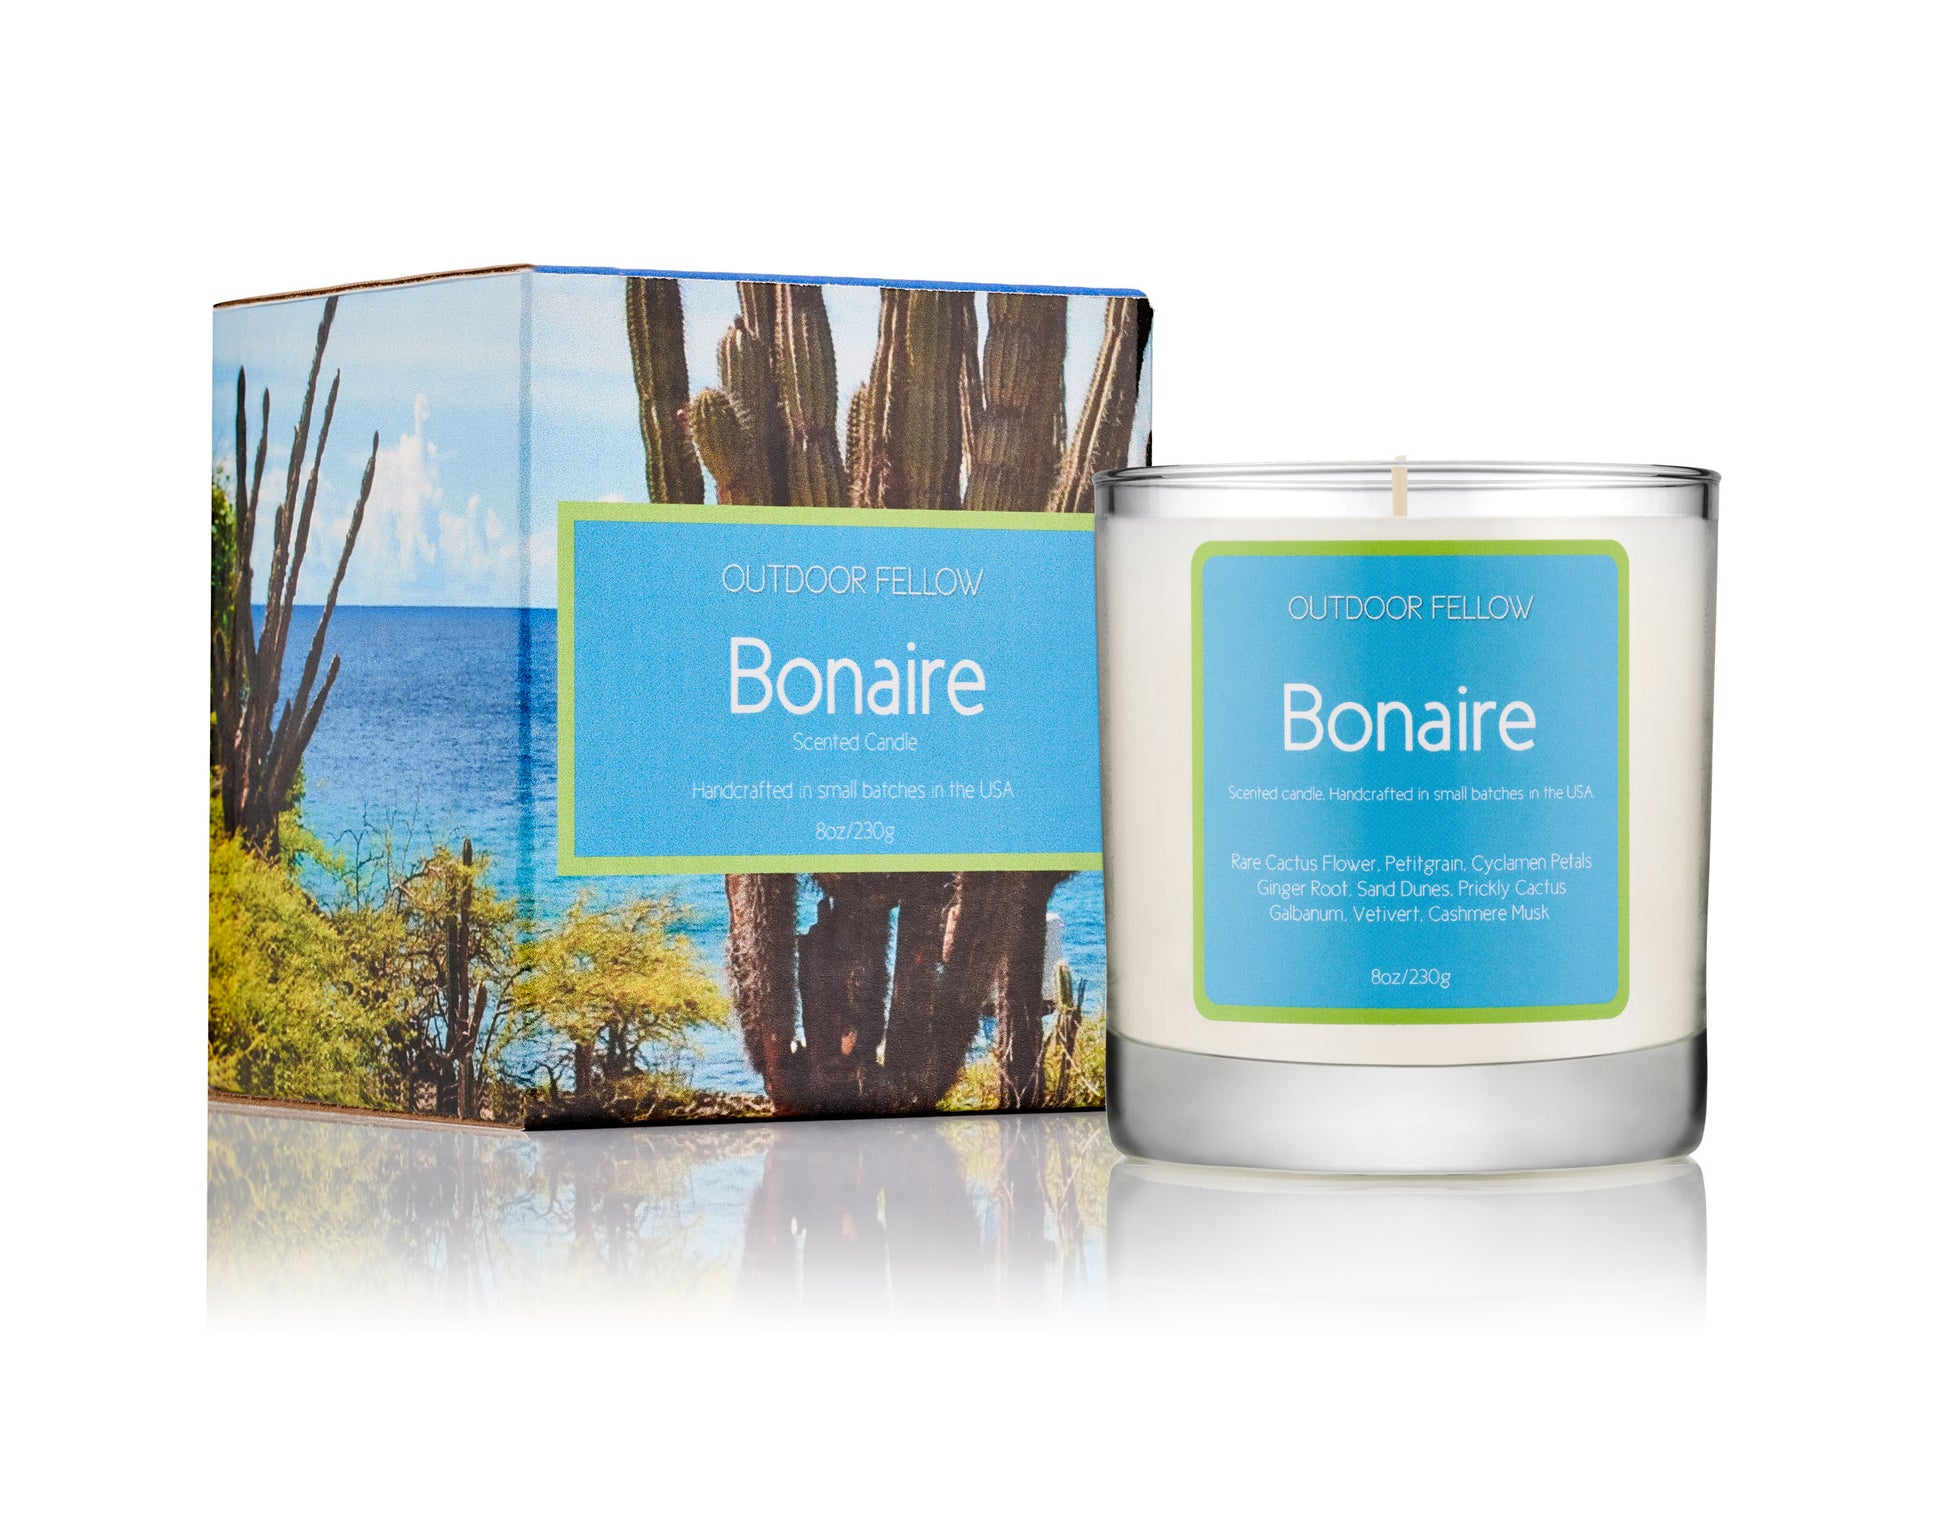 Bonaire scented candle next to packaging on white background